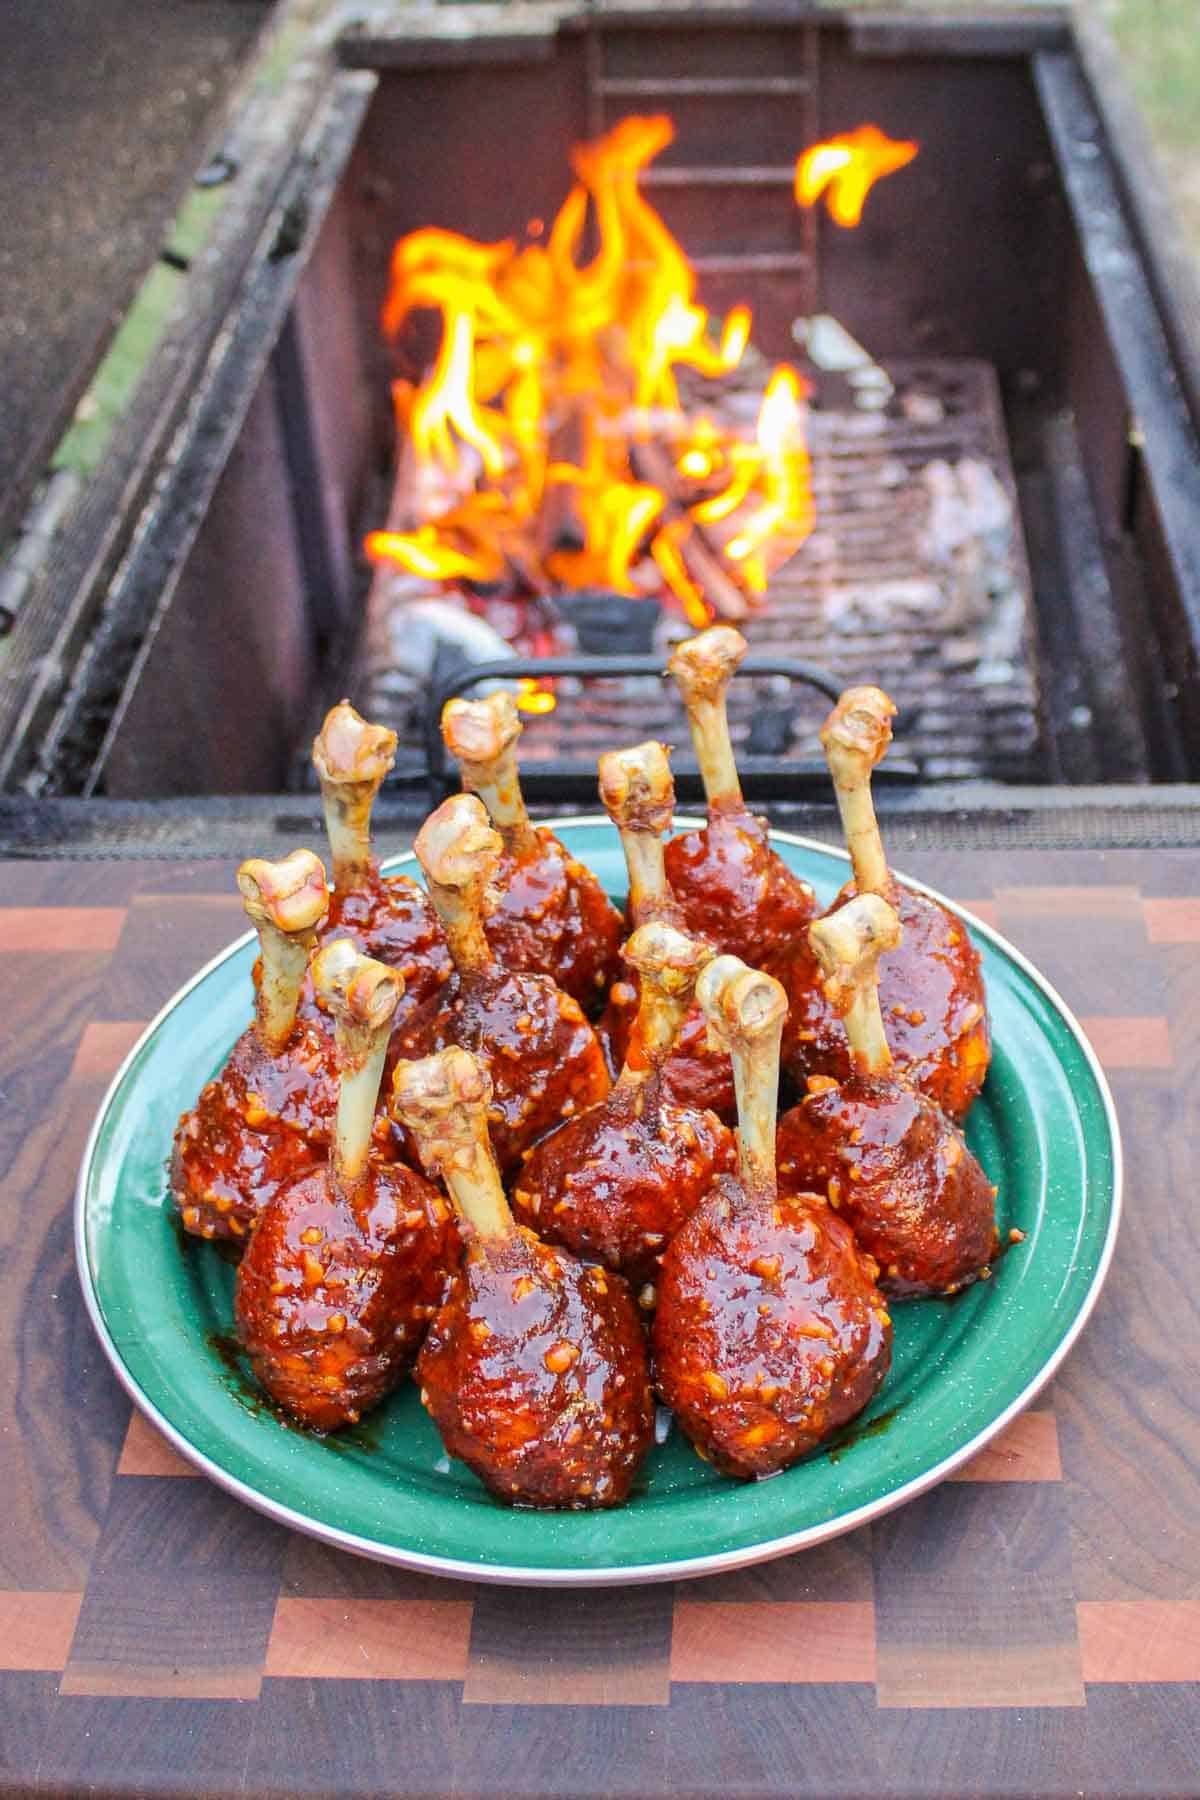 A plate full of chicken drumsticks with the fire's flames in the background.